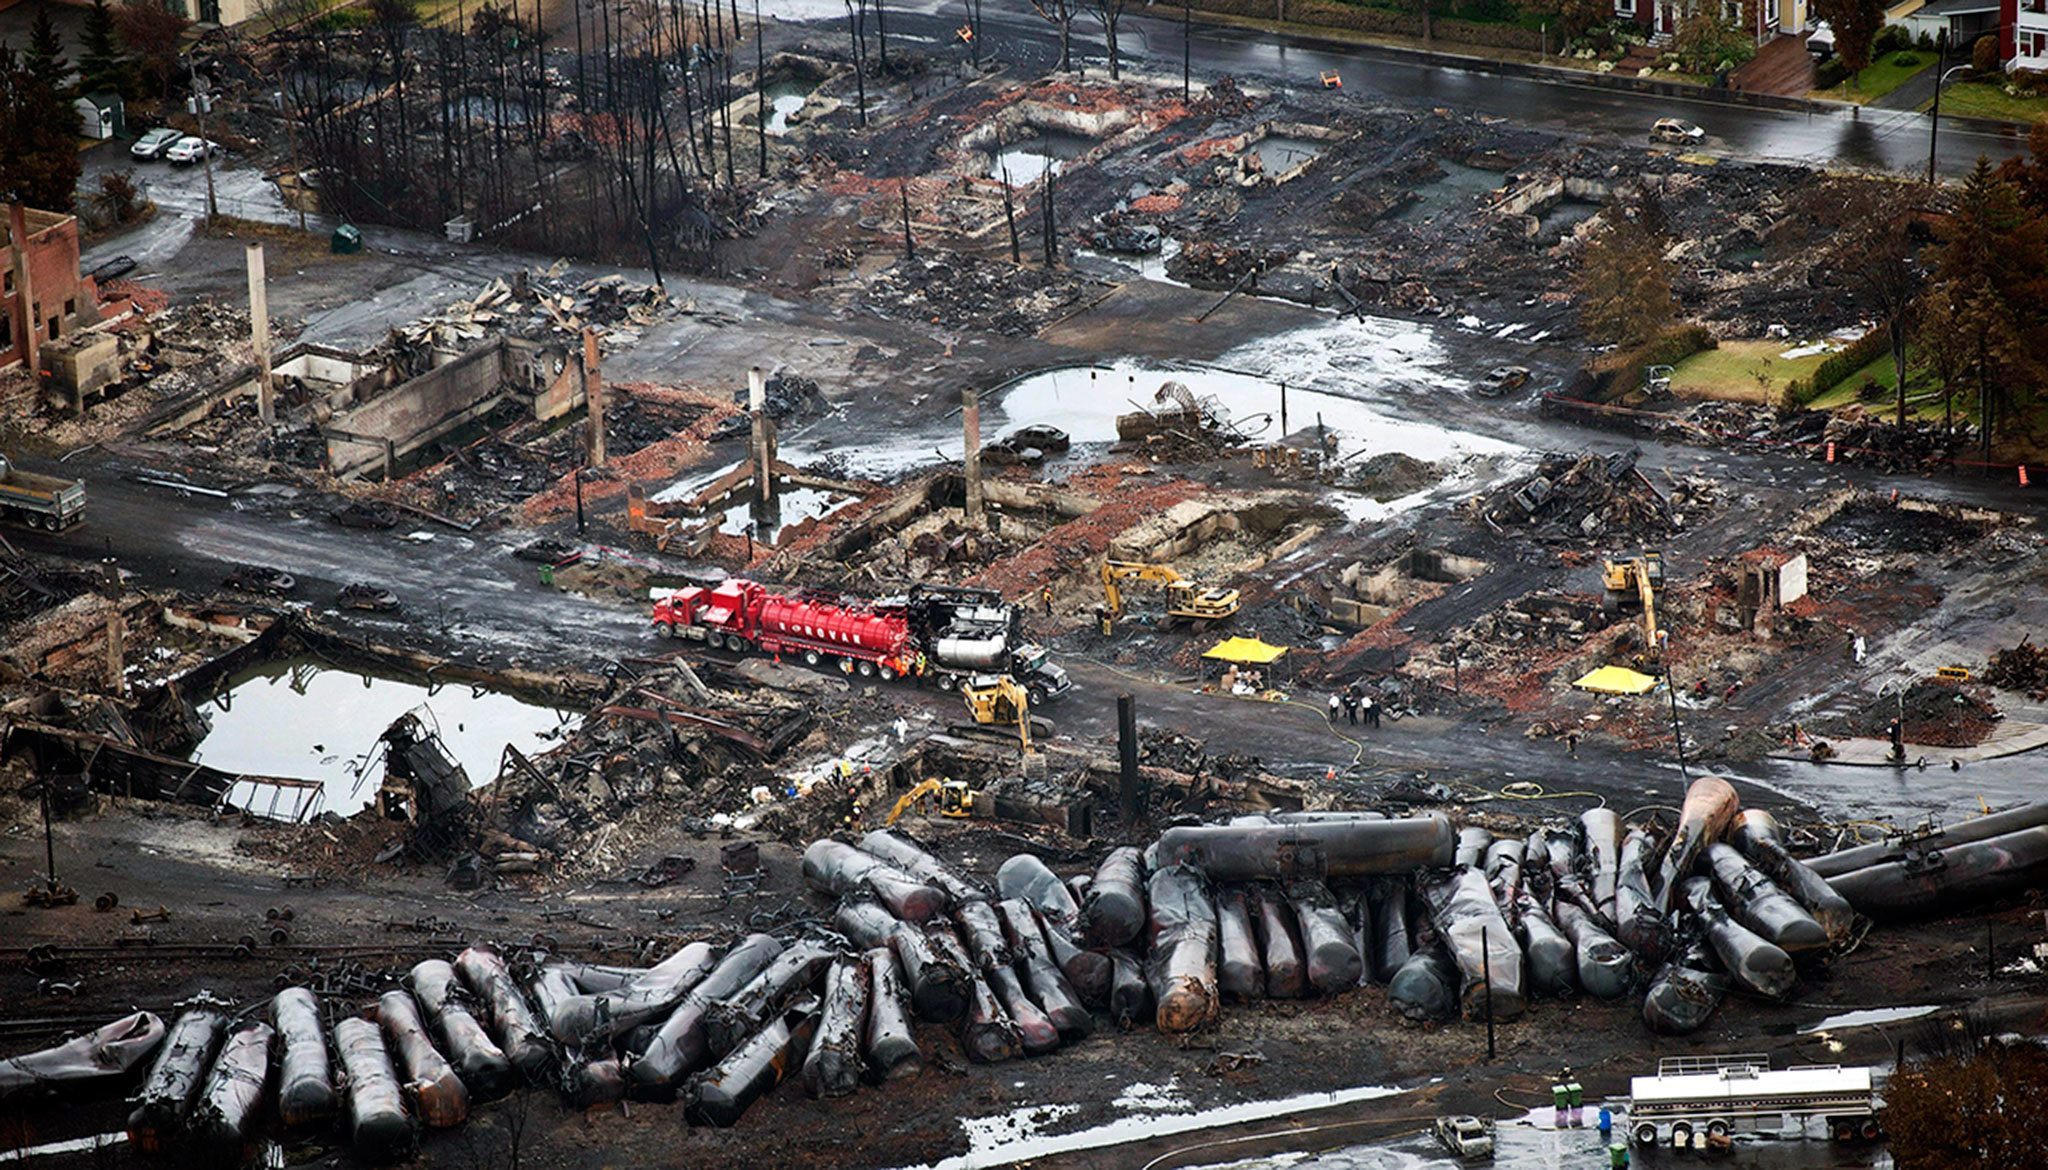 Workers comb through debris in 2013 after an oil train derailed and exploded in Lac-Megantic, Quebec, killing 47 people. (Paul Chiasson/The Canadian Press)